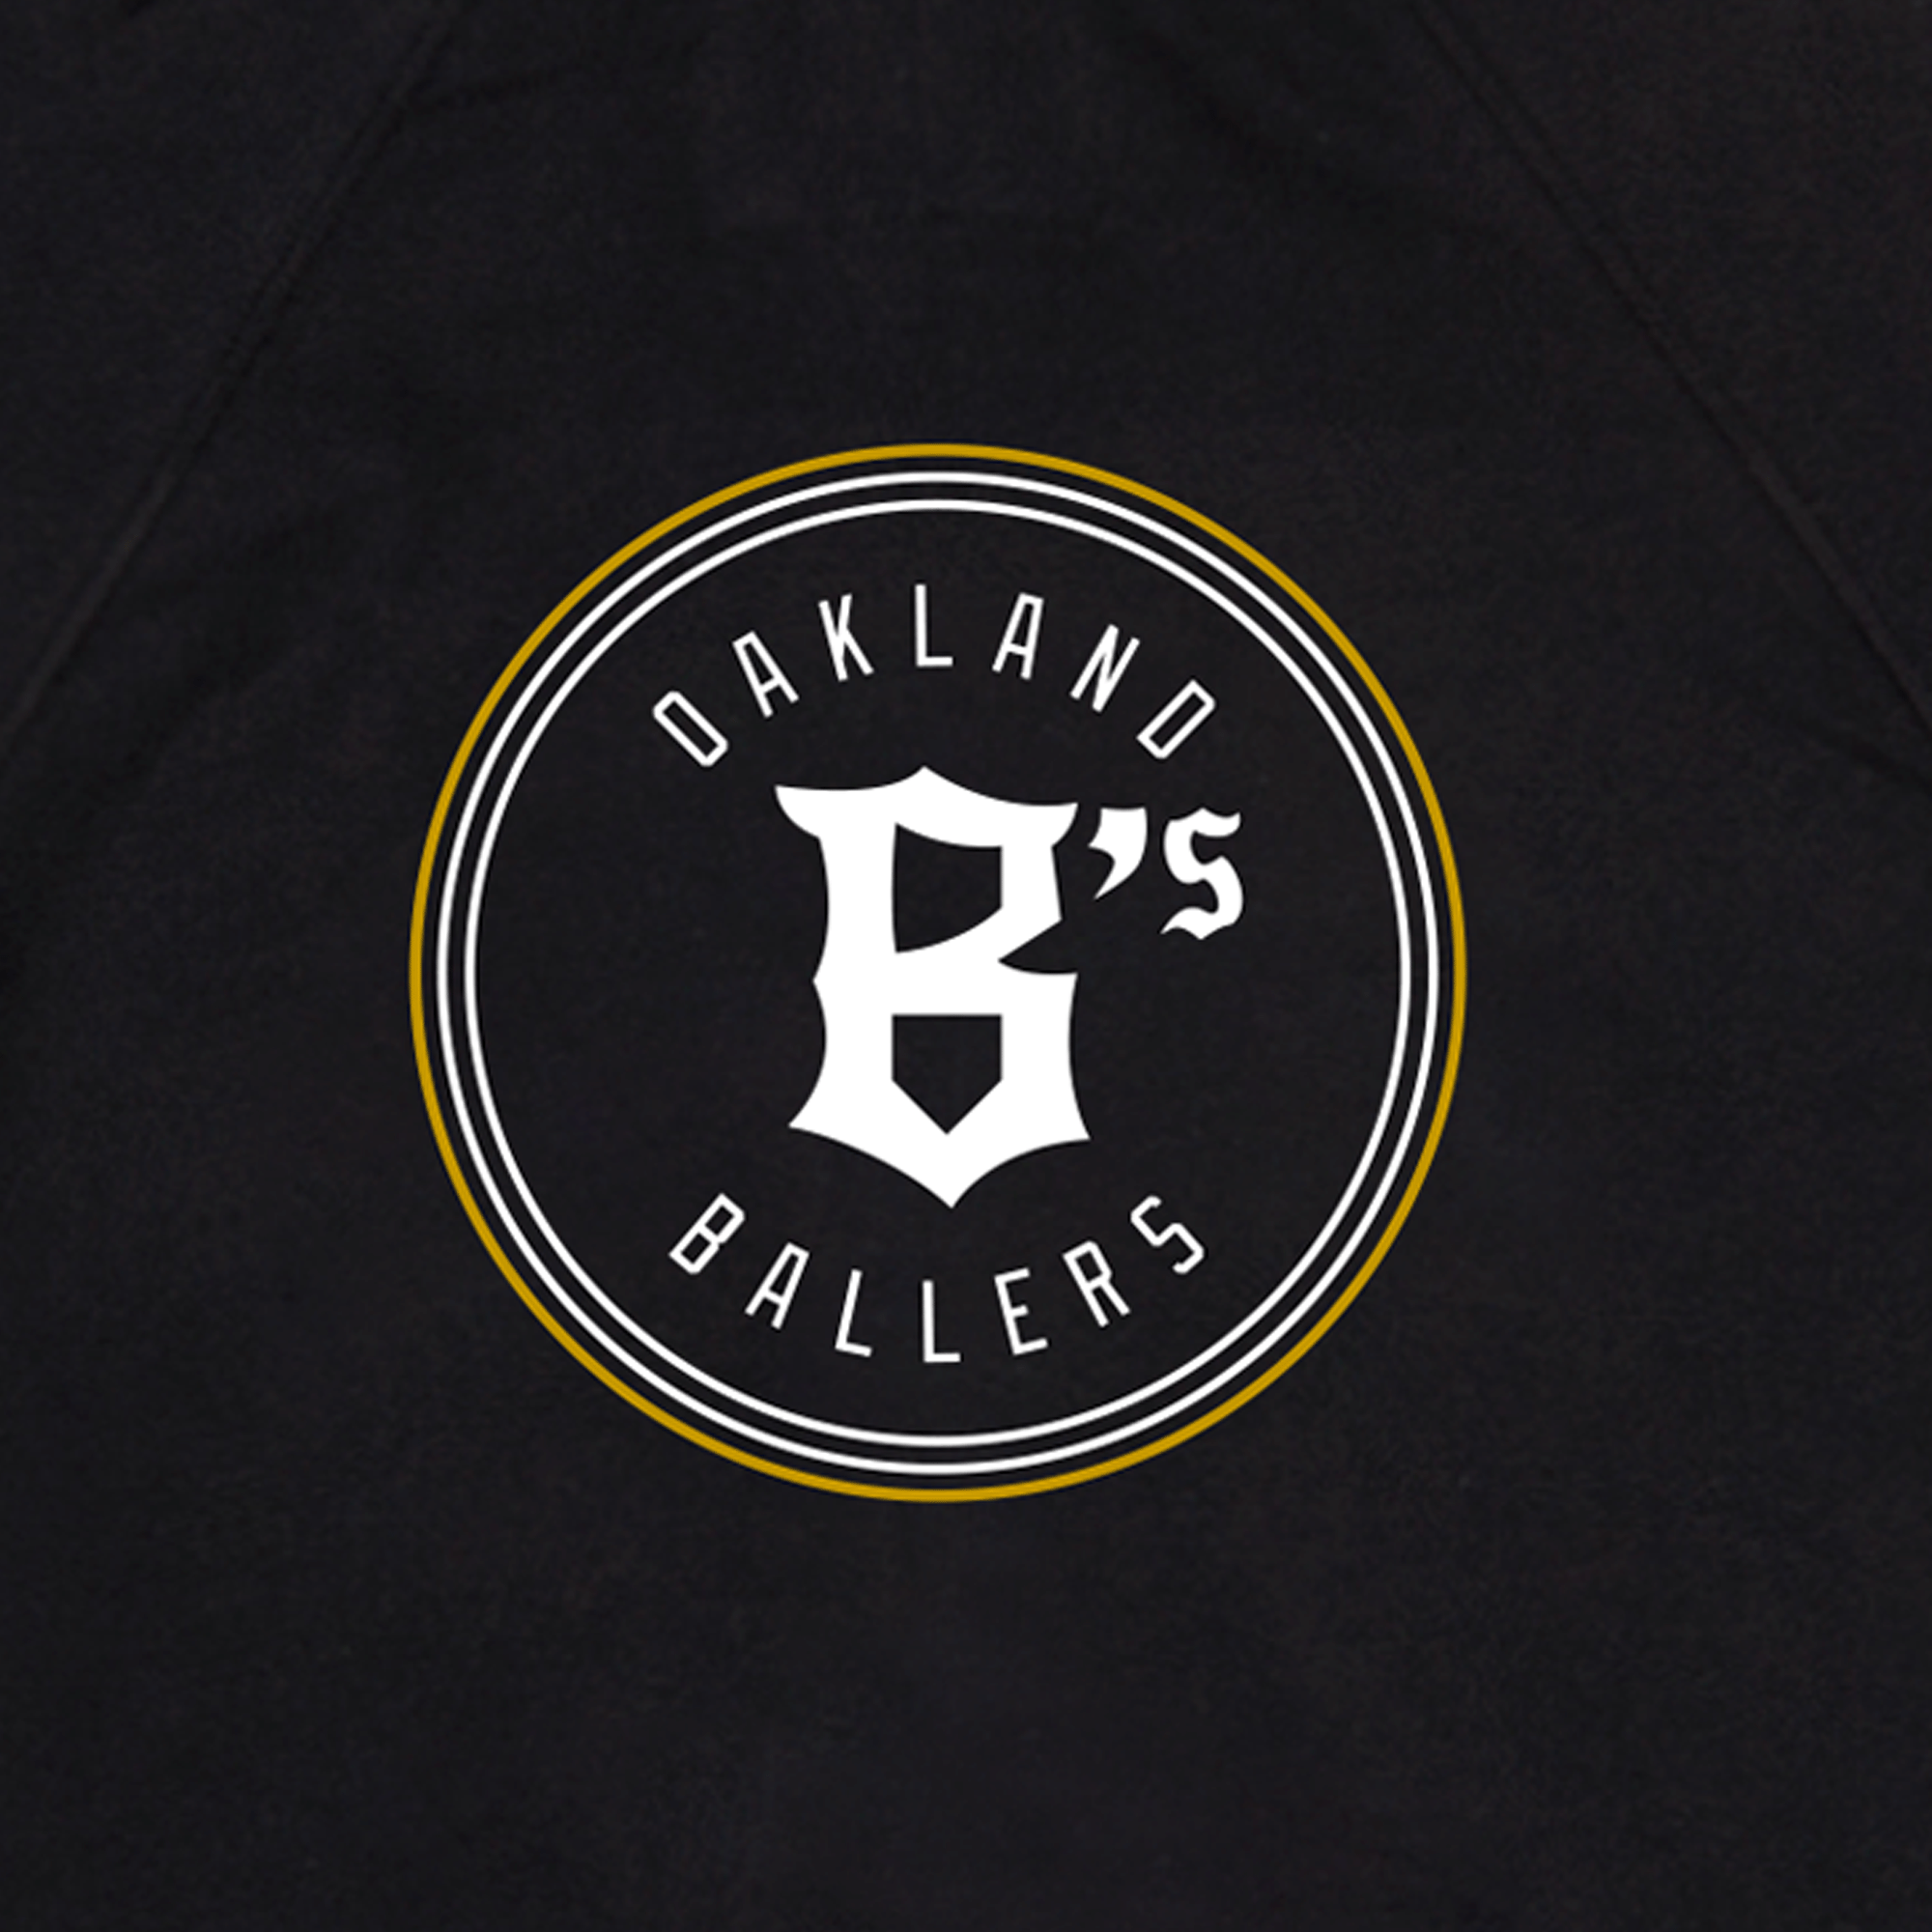 Close-up of round white and gold Oakland Ballers logo and wordmark on the front chest of a black zip up hooded sweatshirt.